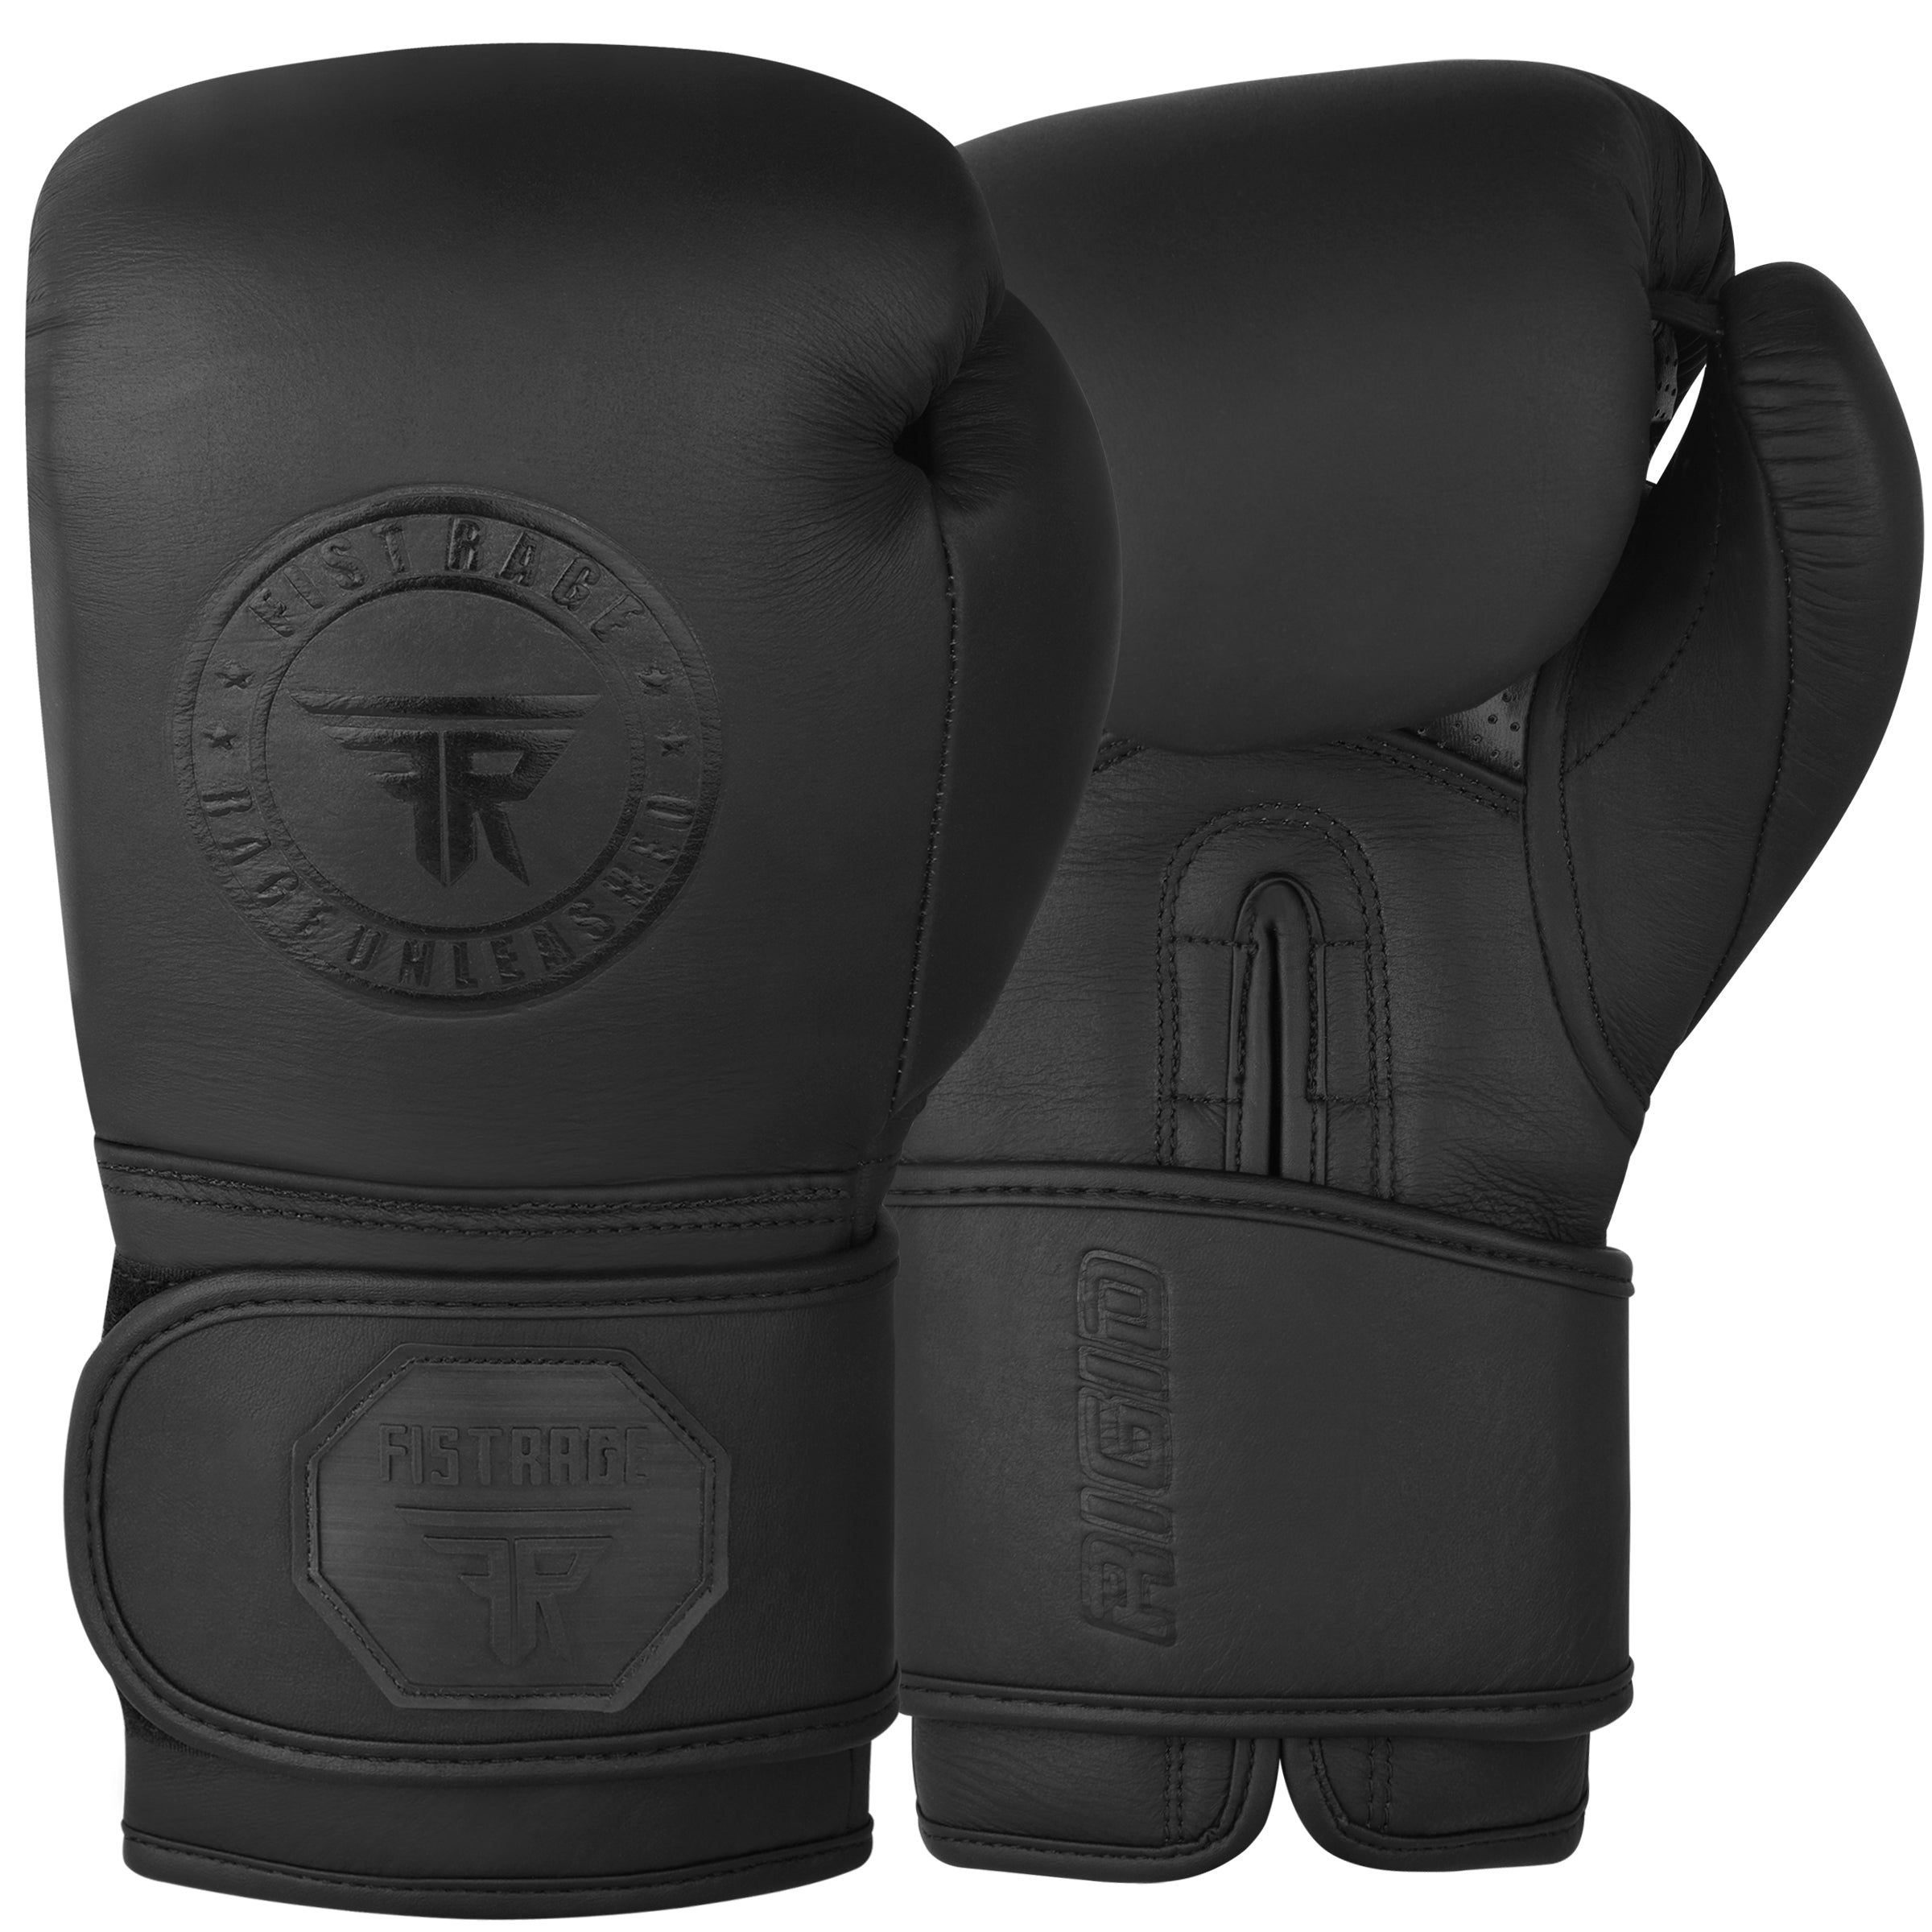 Rigid Professional Leather Boxing Gloves